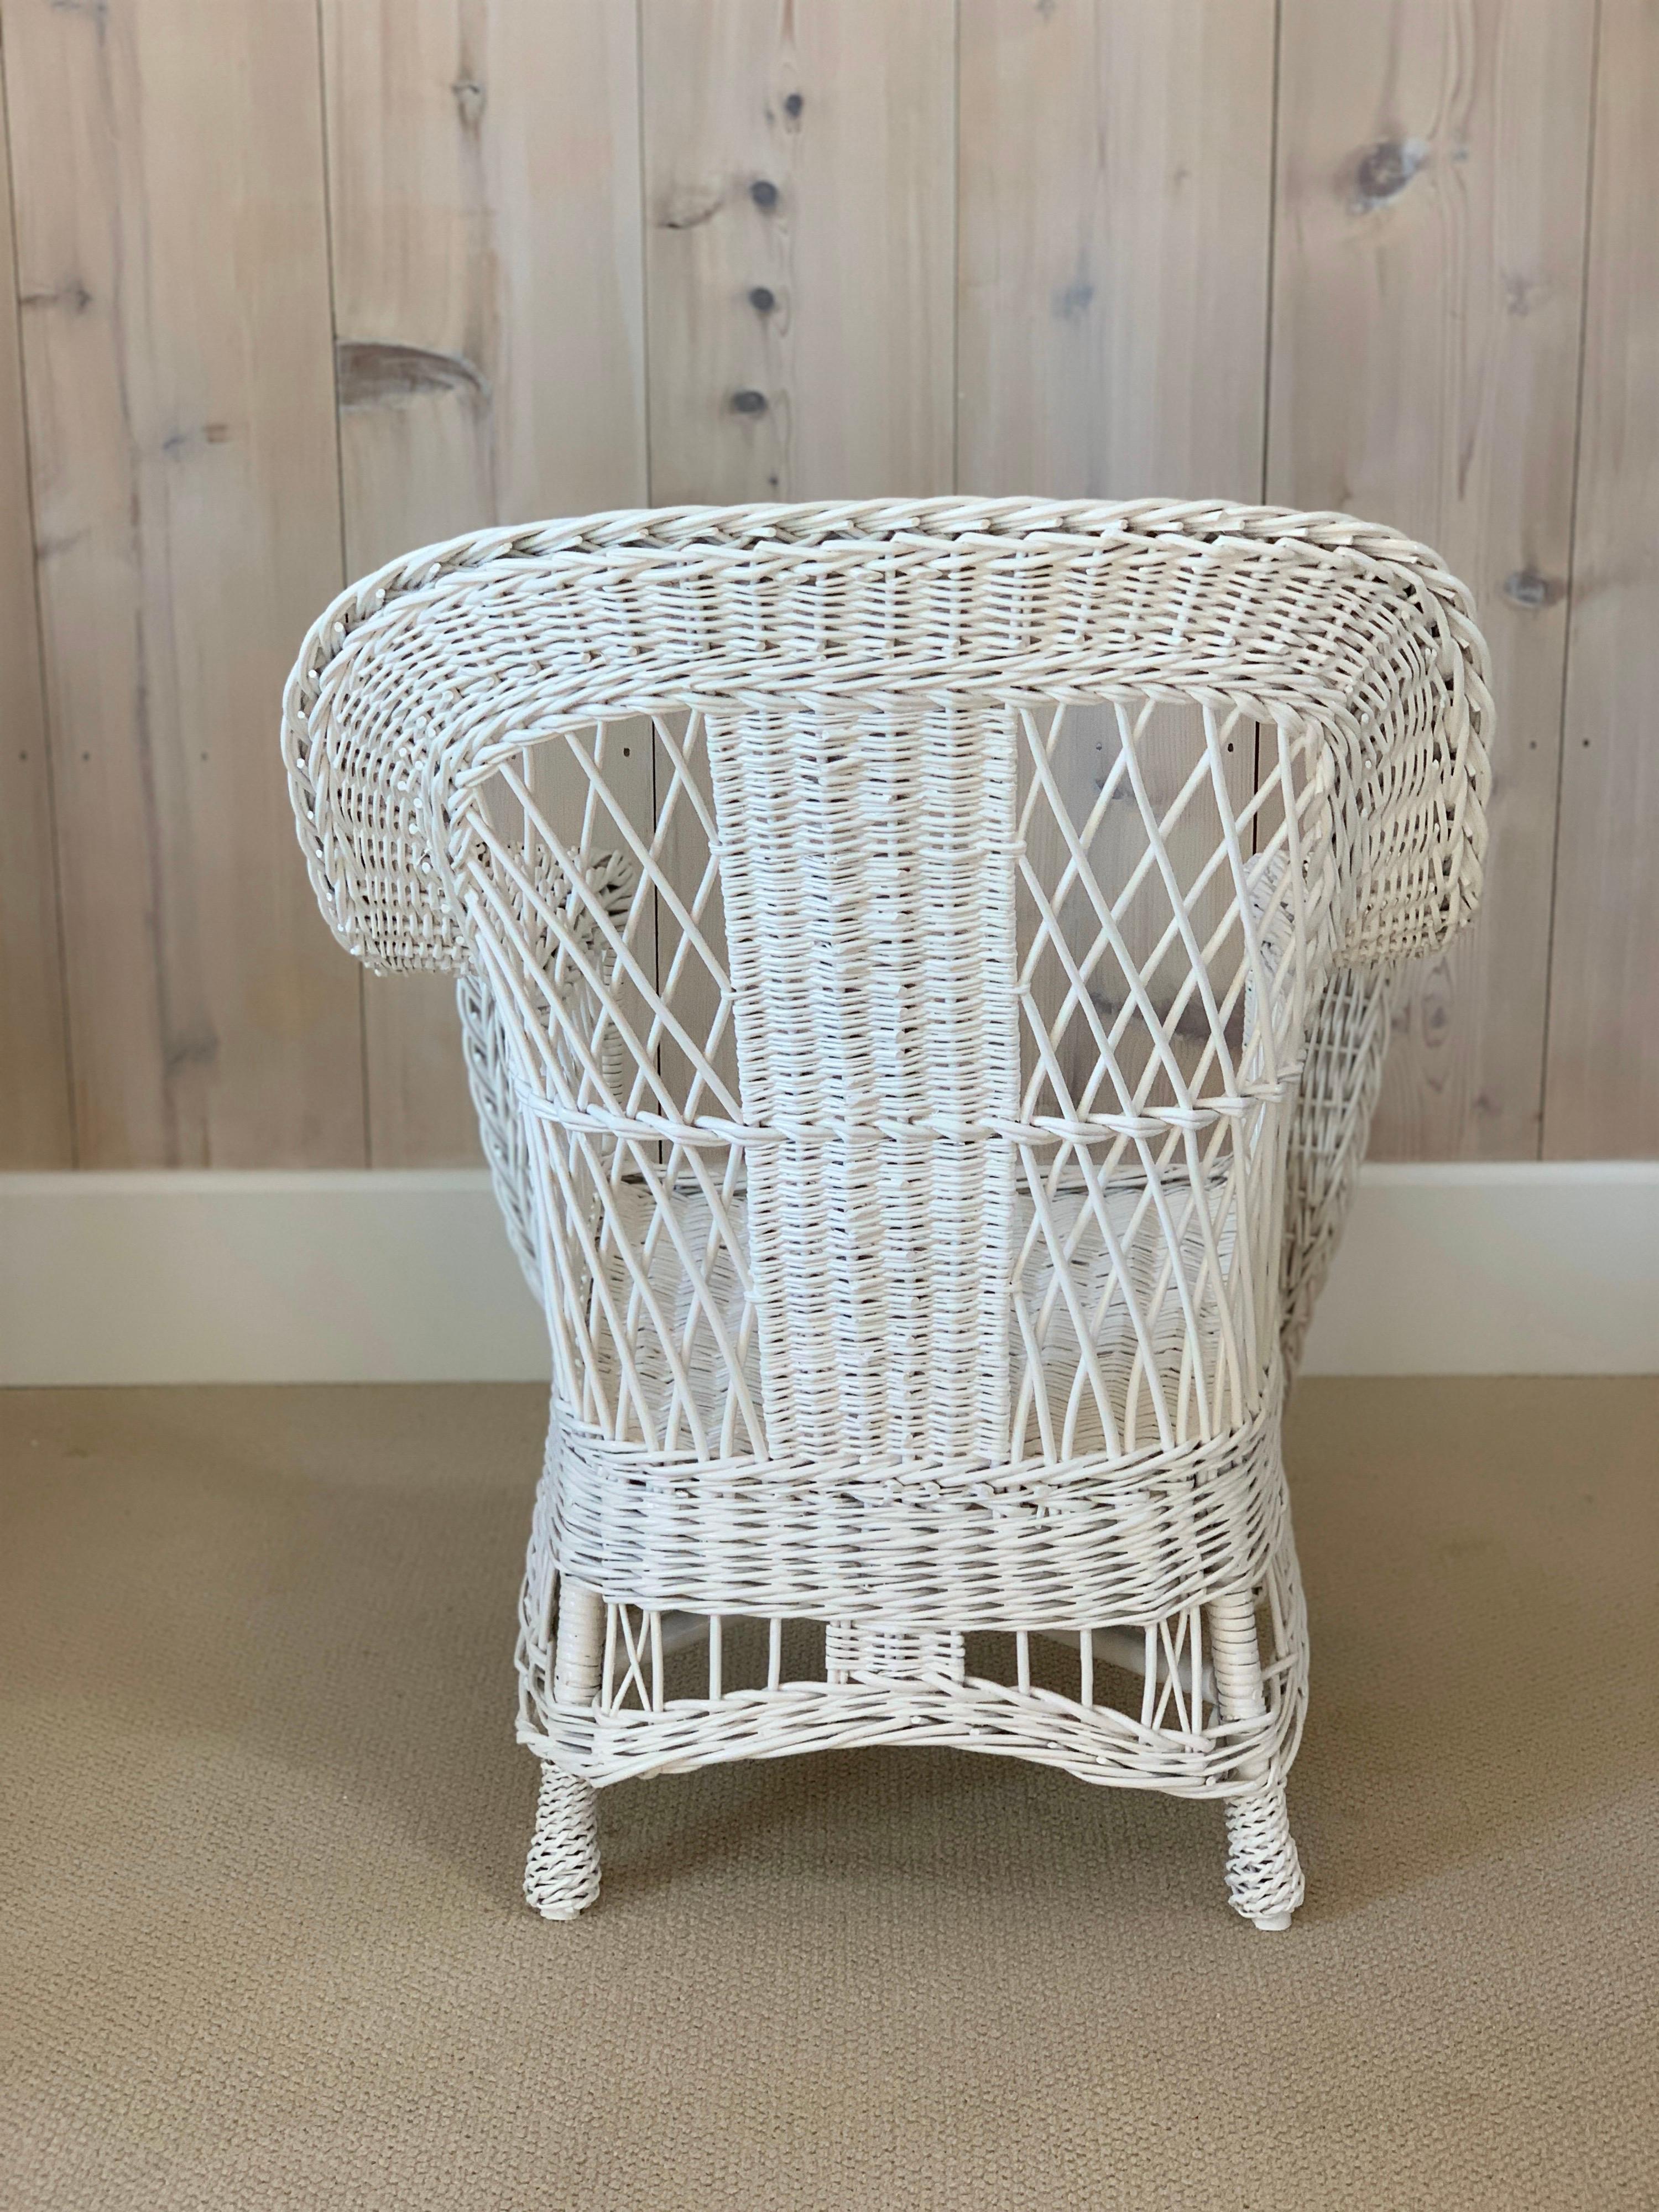 Hand-Woven Antique Wicker Chair